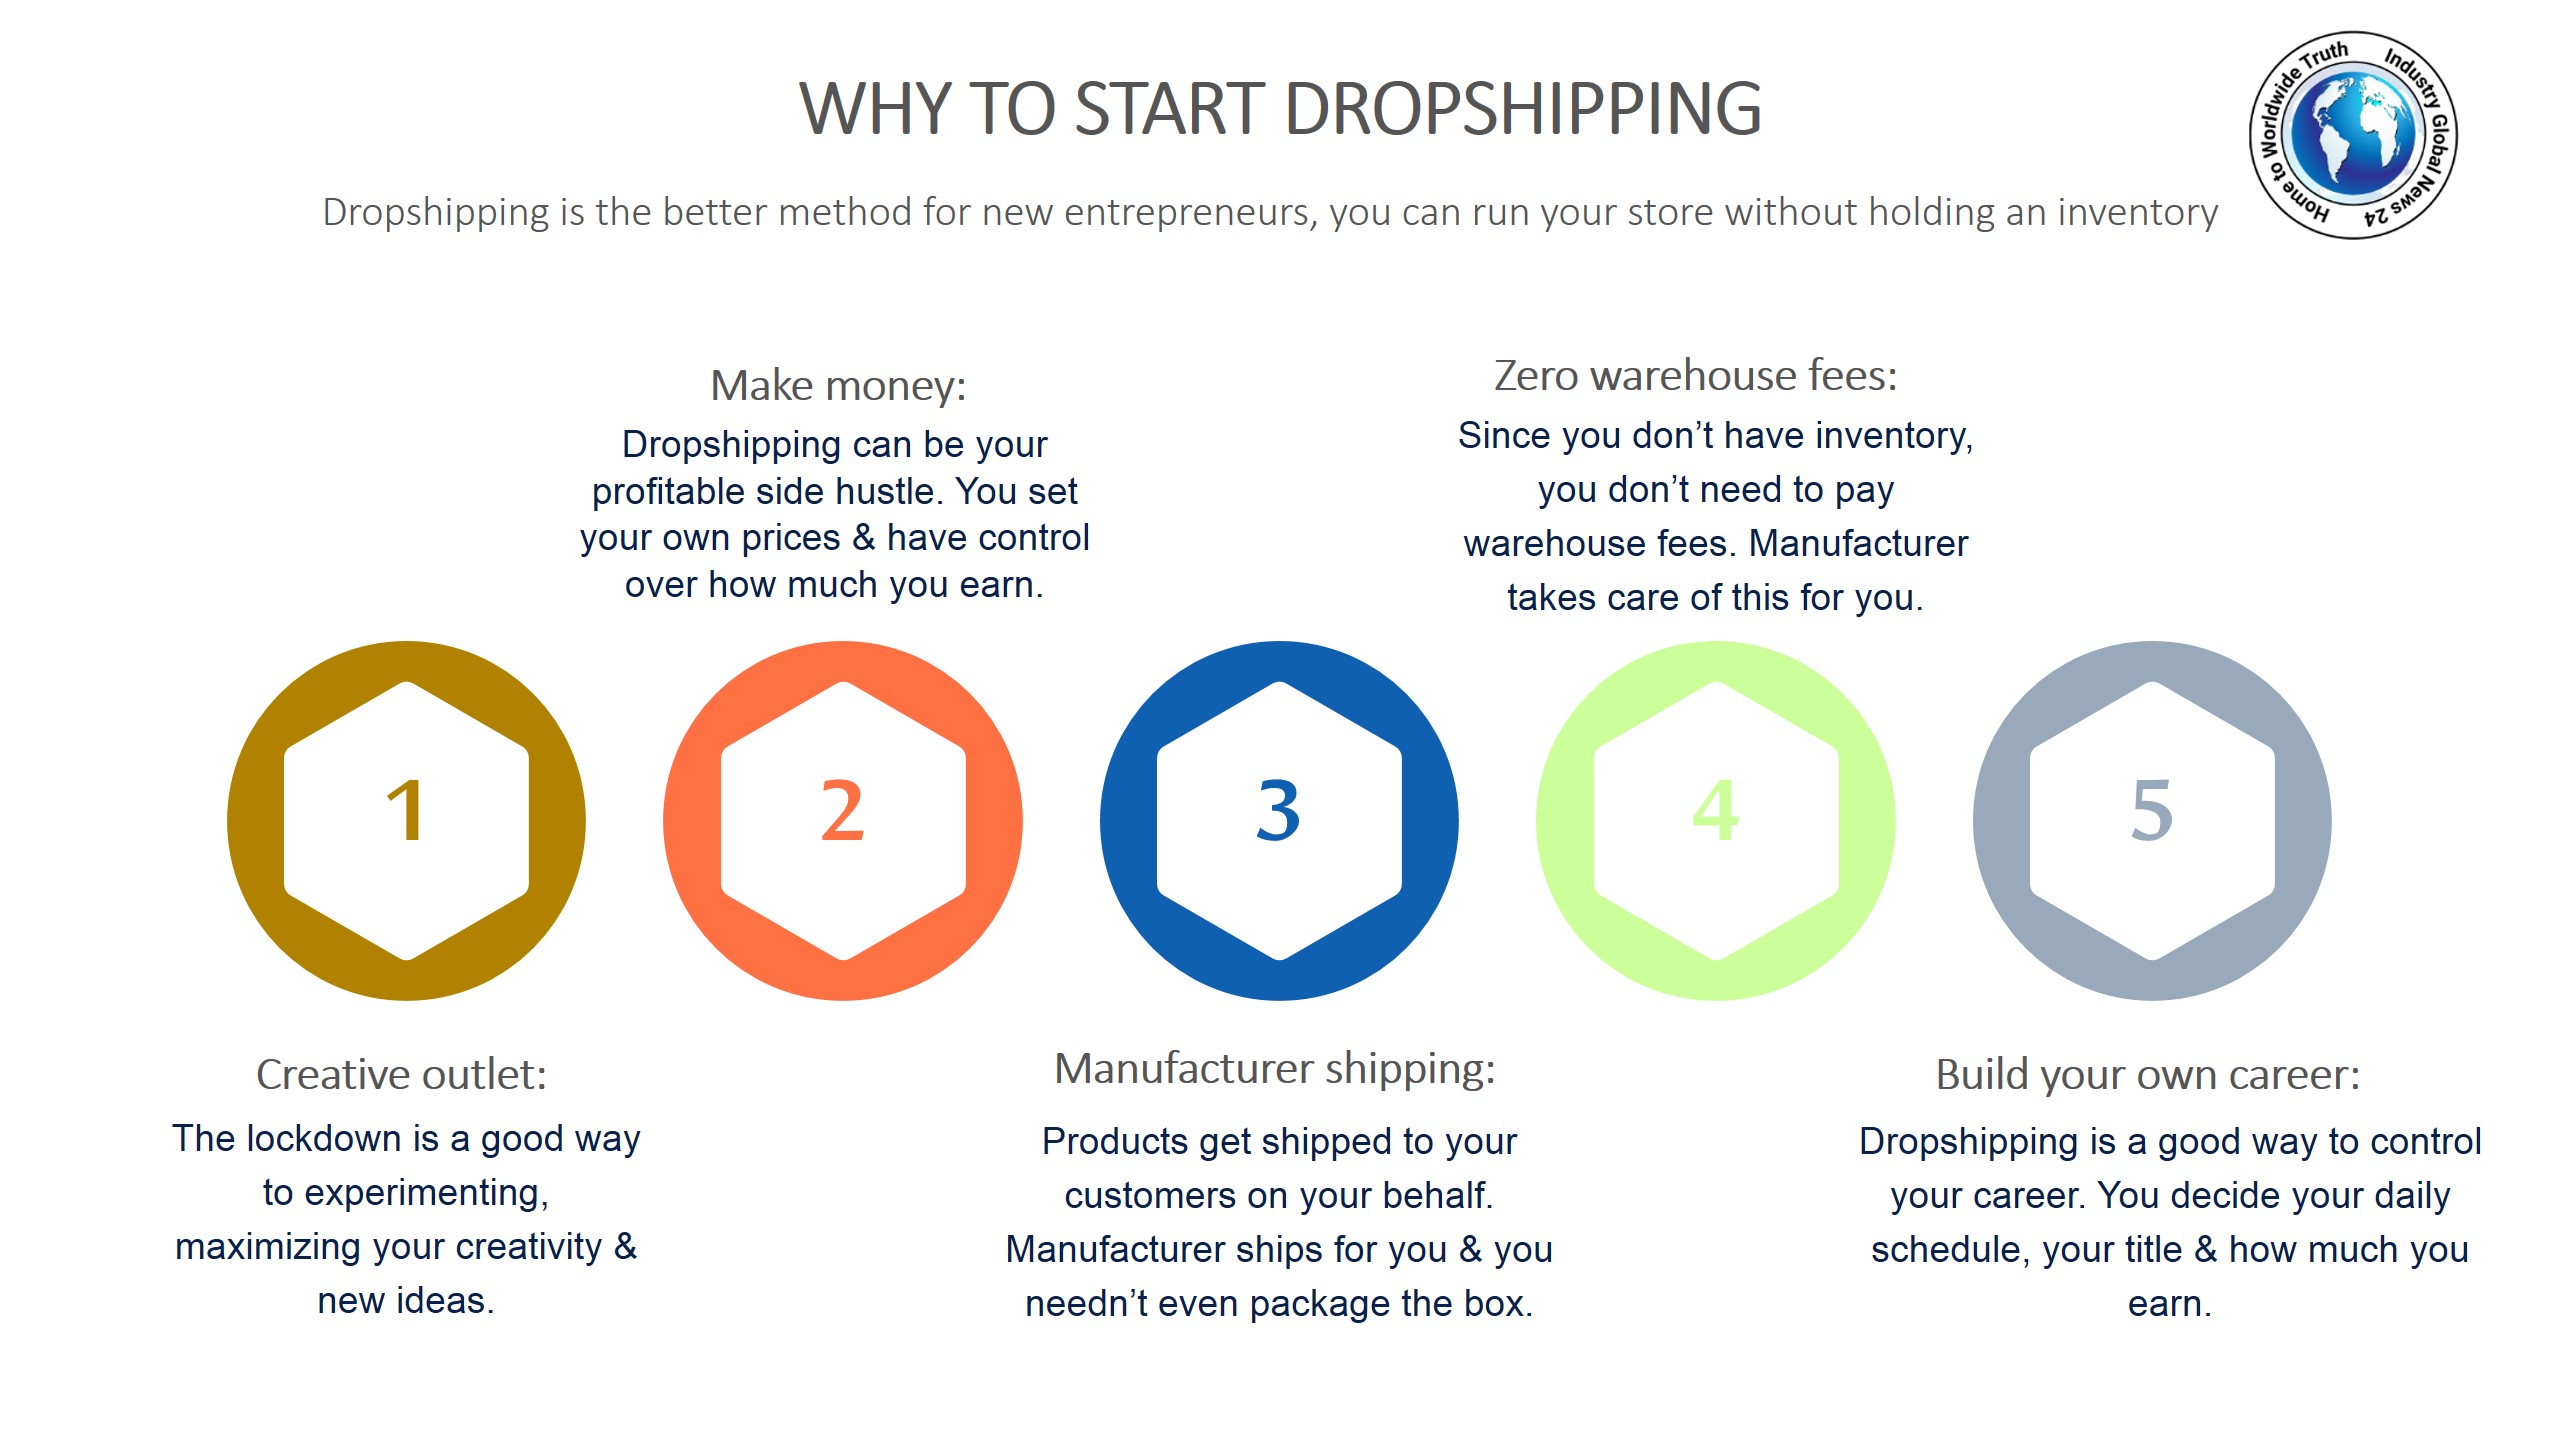 Why to start dropshipping